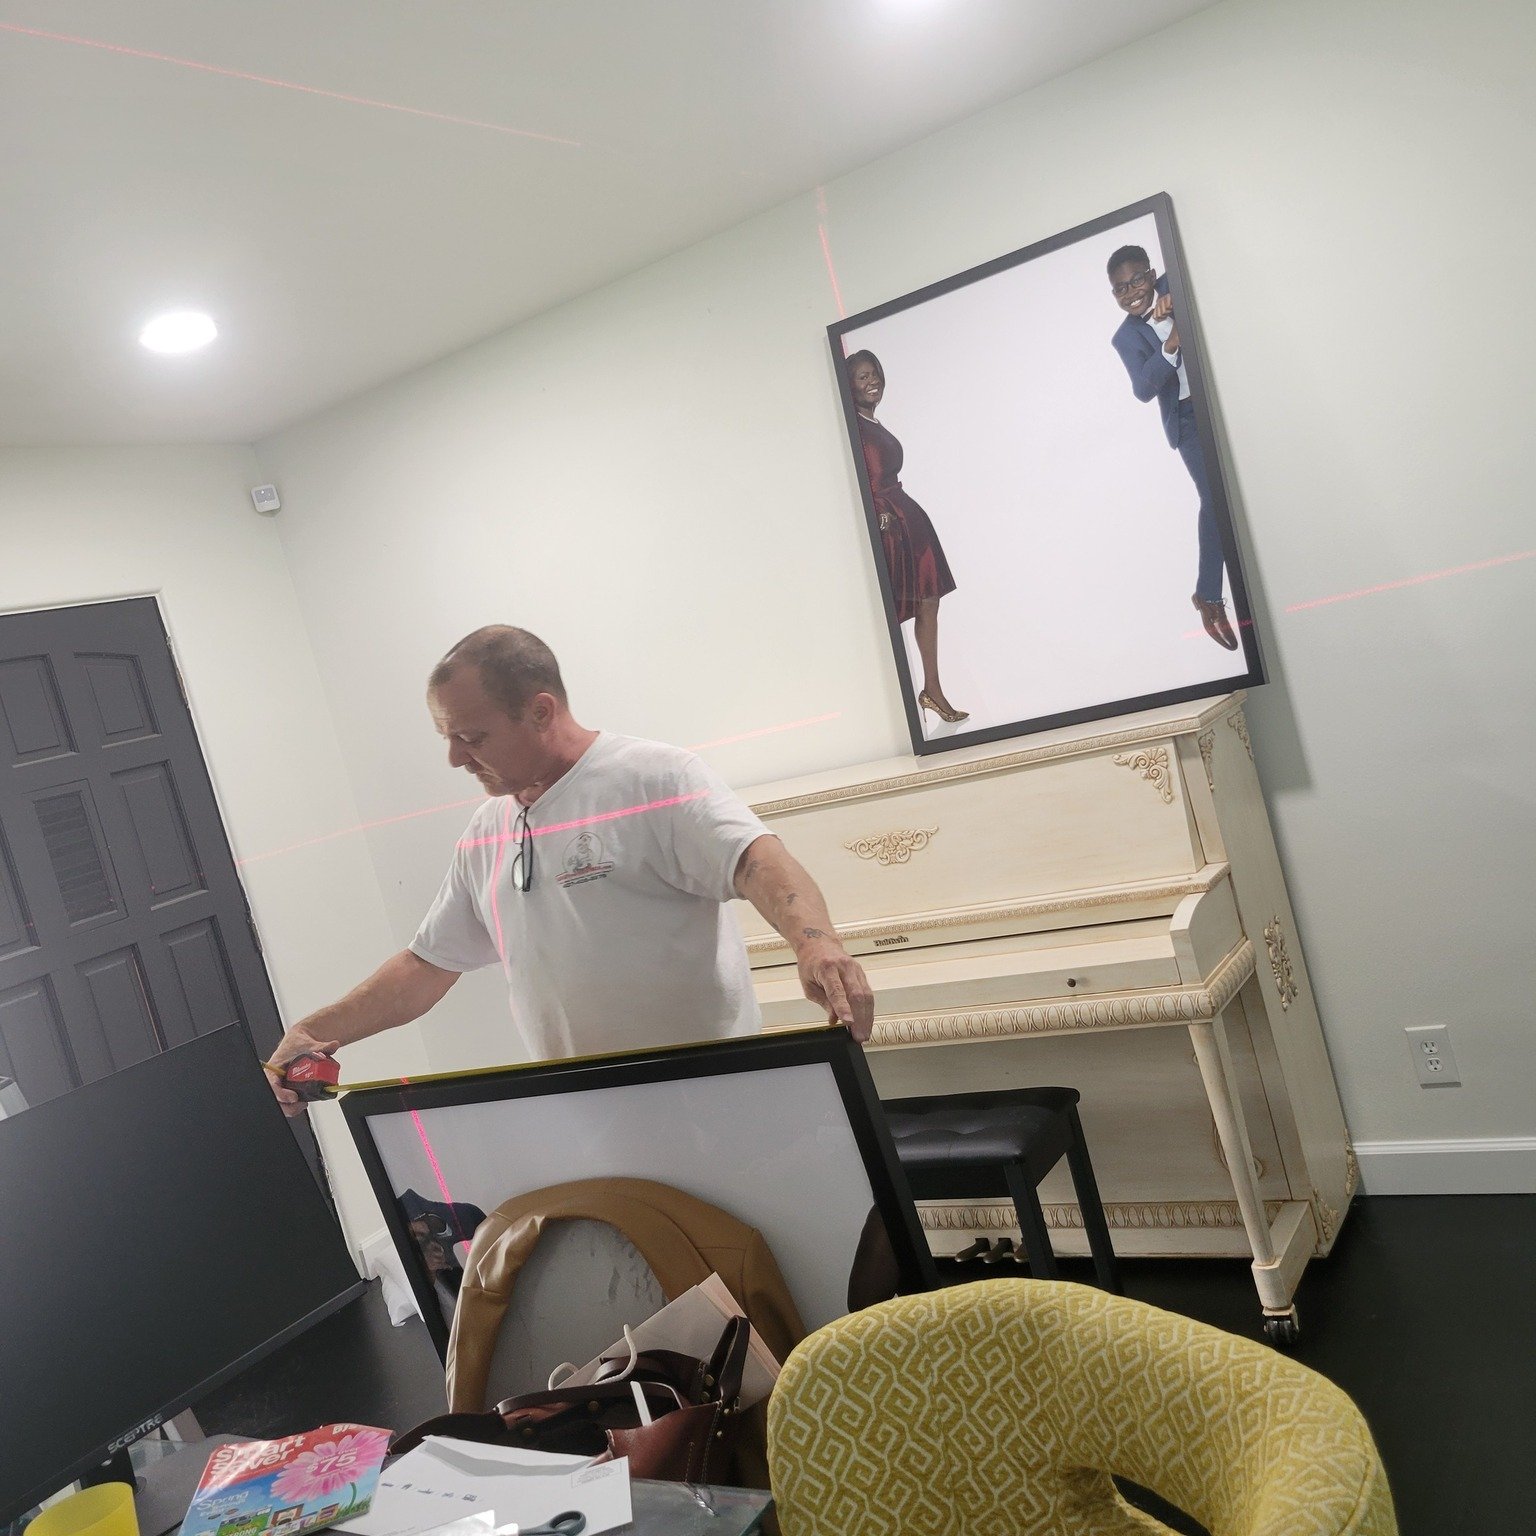 Another installation of The 'Rinat' - our studios one of a kind transitional family portraits - is successfully complete 
📸👉🖼️😍🖼️😍
Keep on dancing Regine and Elyh 💃🕺💃🕺
LOVE your new family portrait 🩷